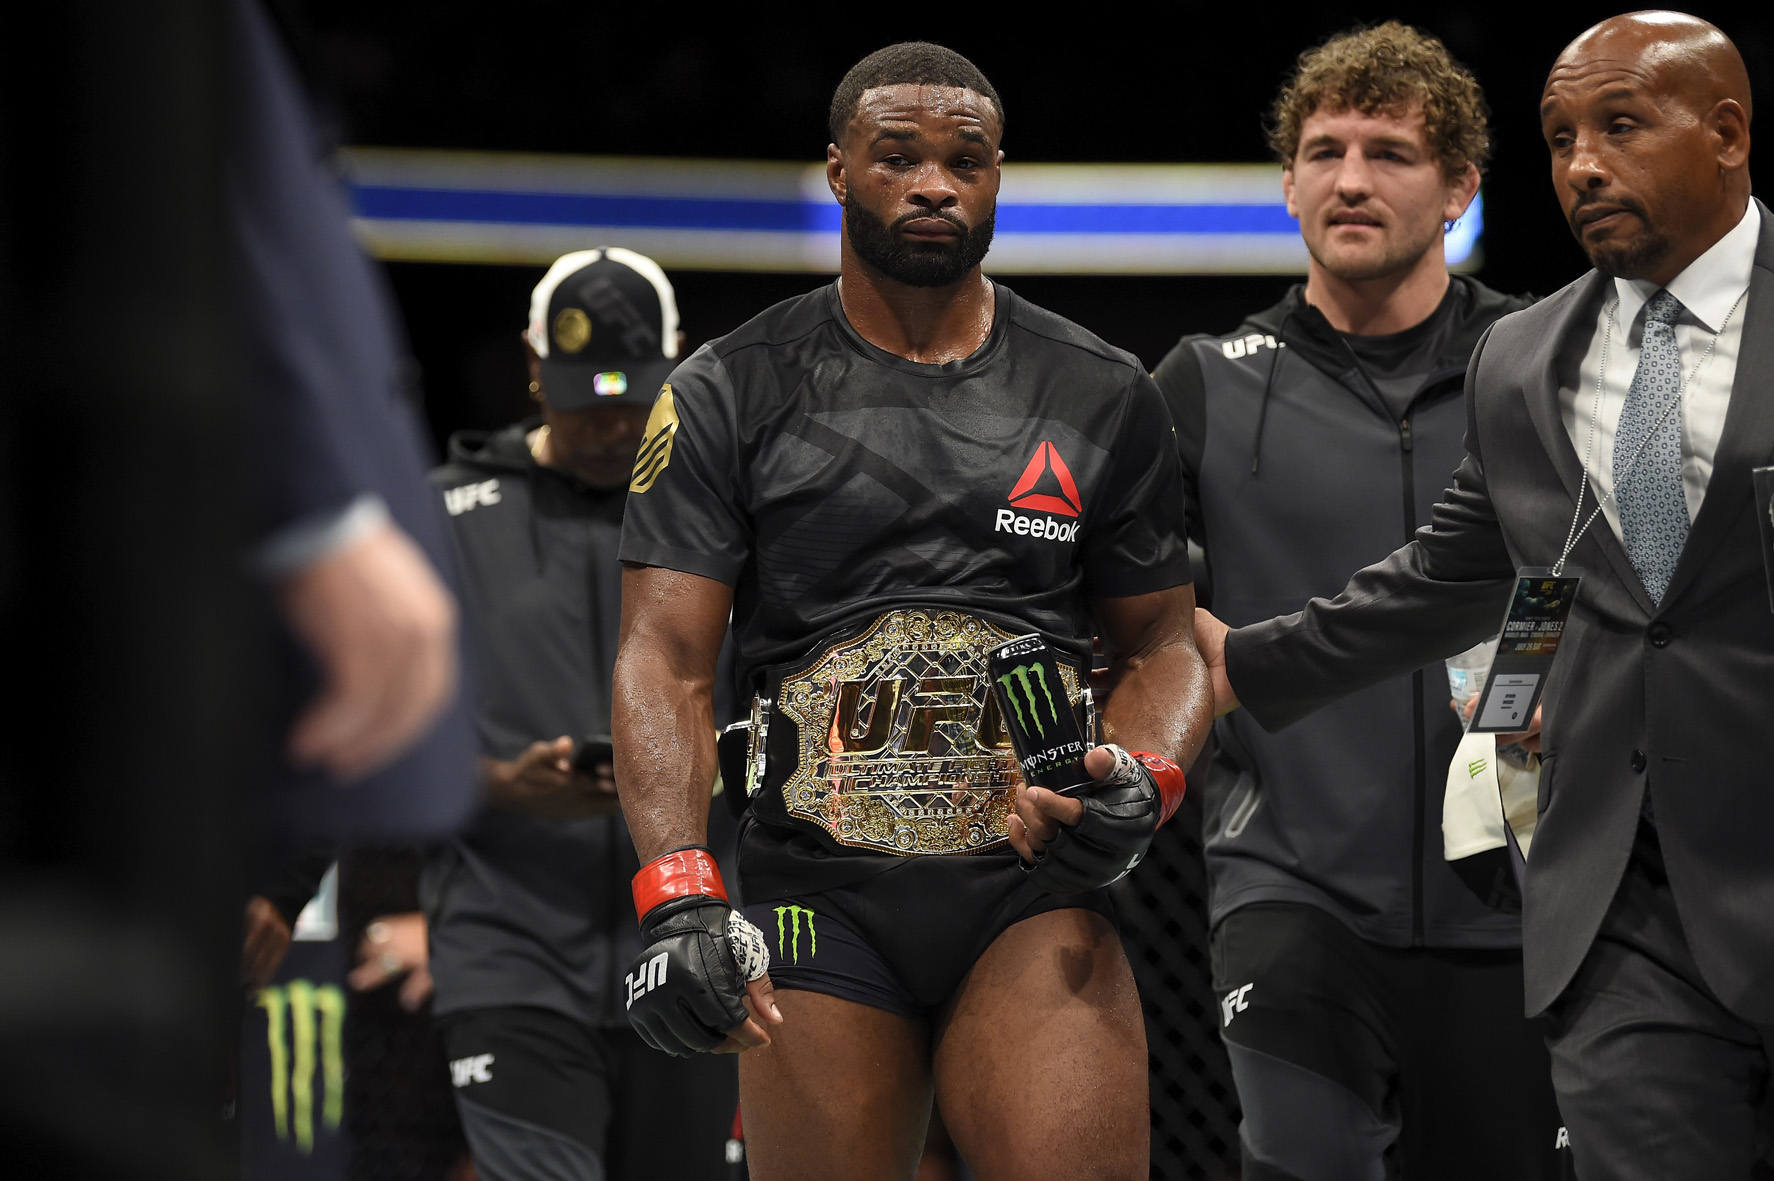 Monster Energy's Tyron 'The Chosen One' Woodley Wins Retains Welterweight Title